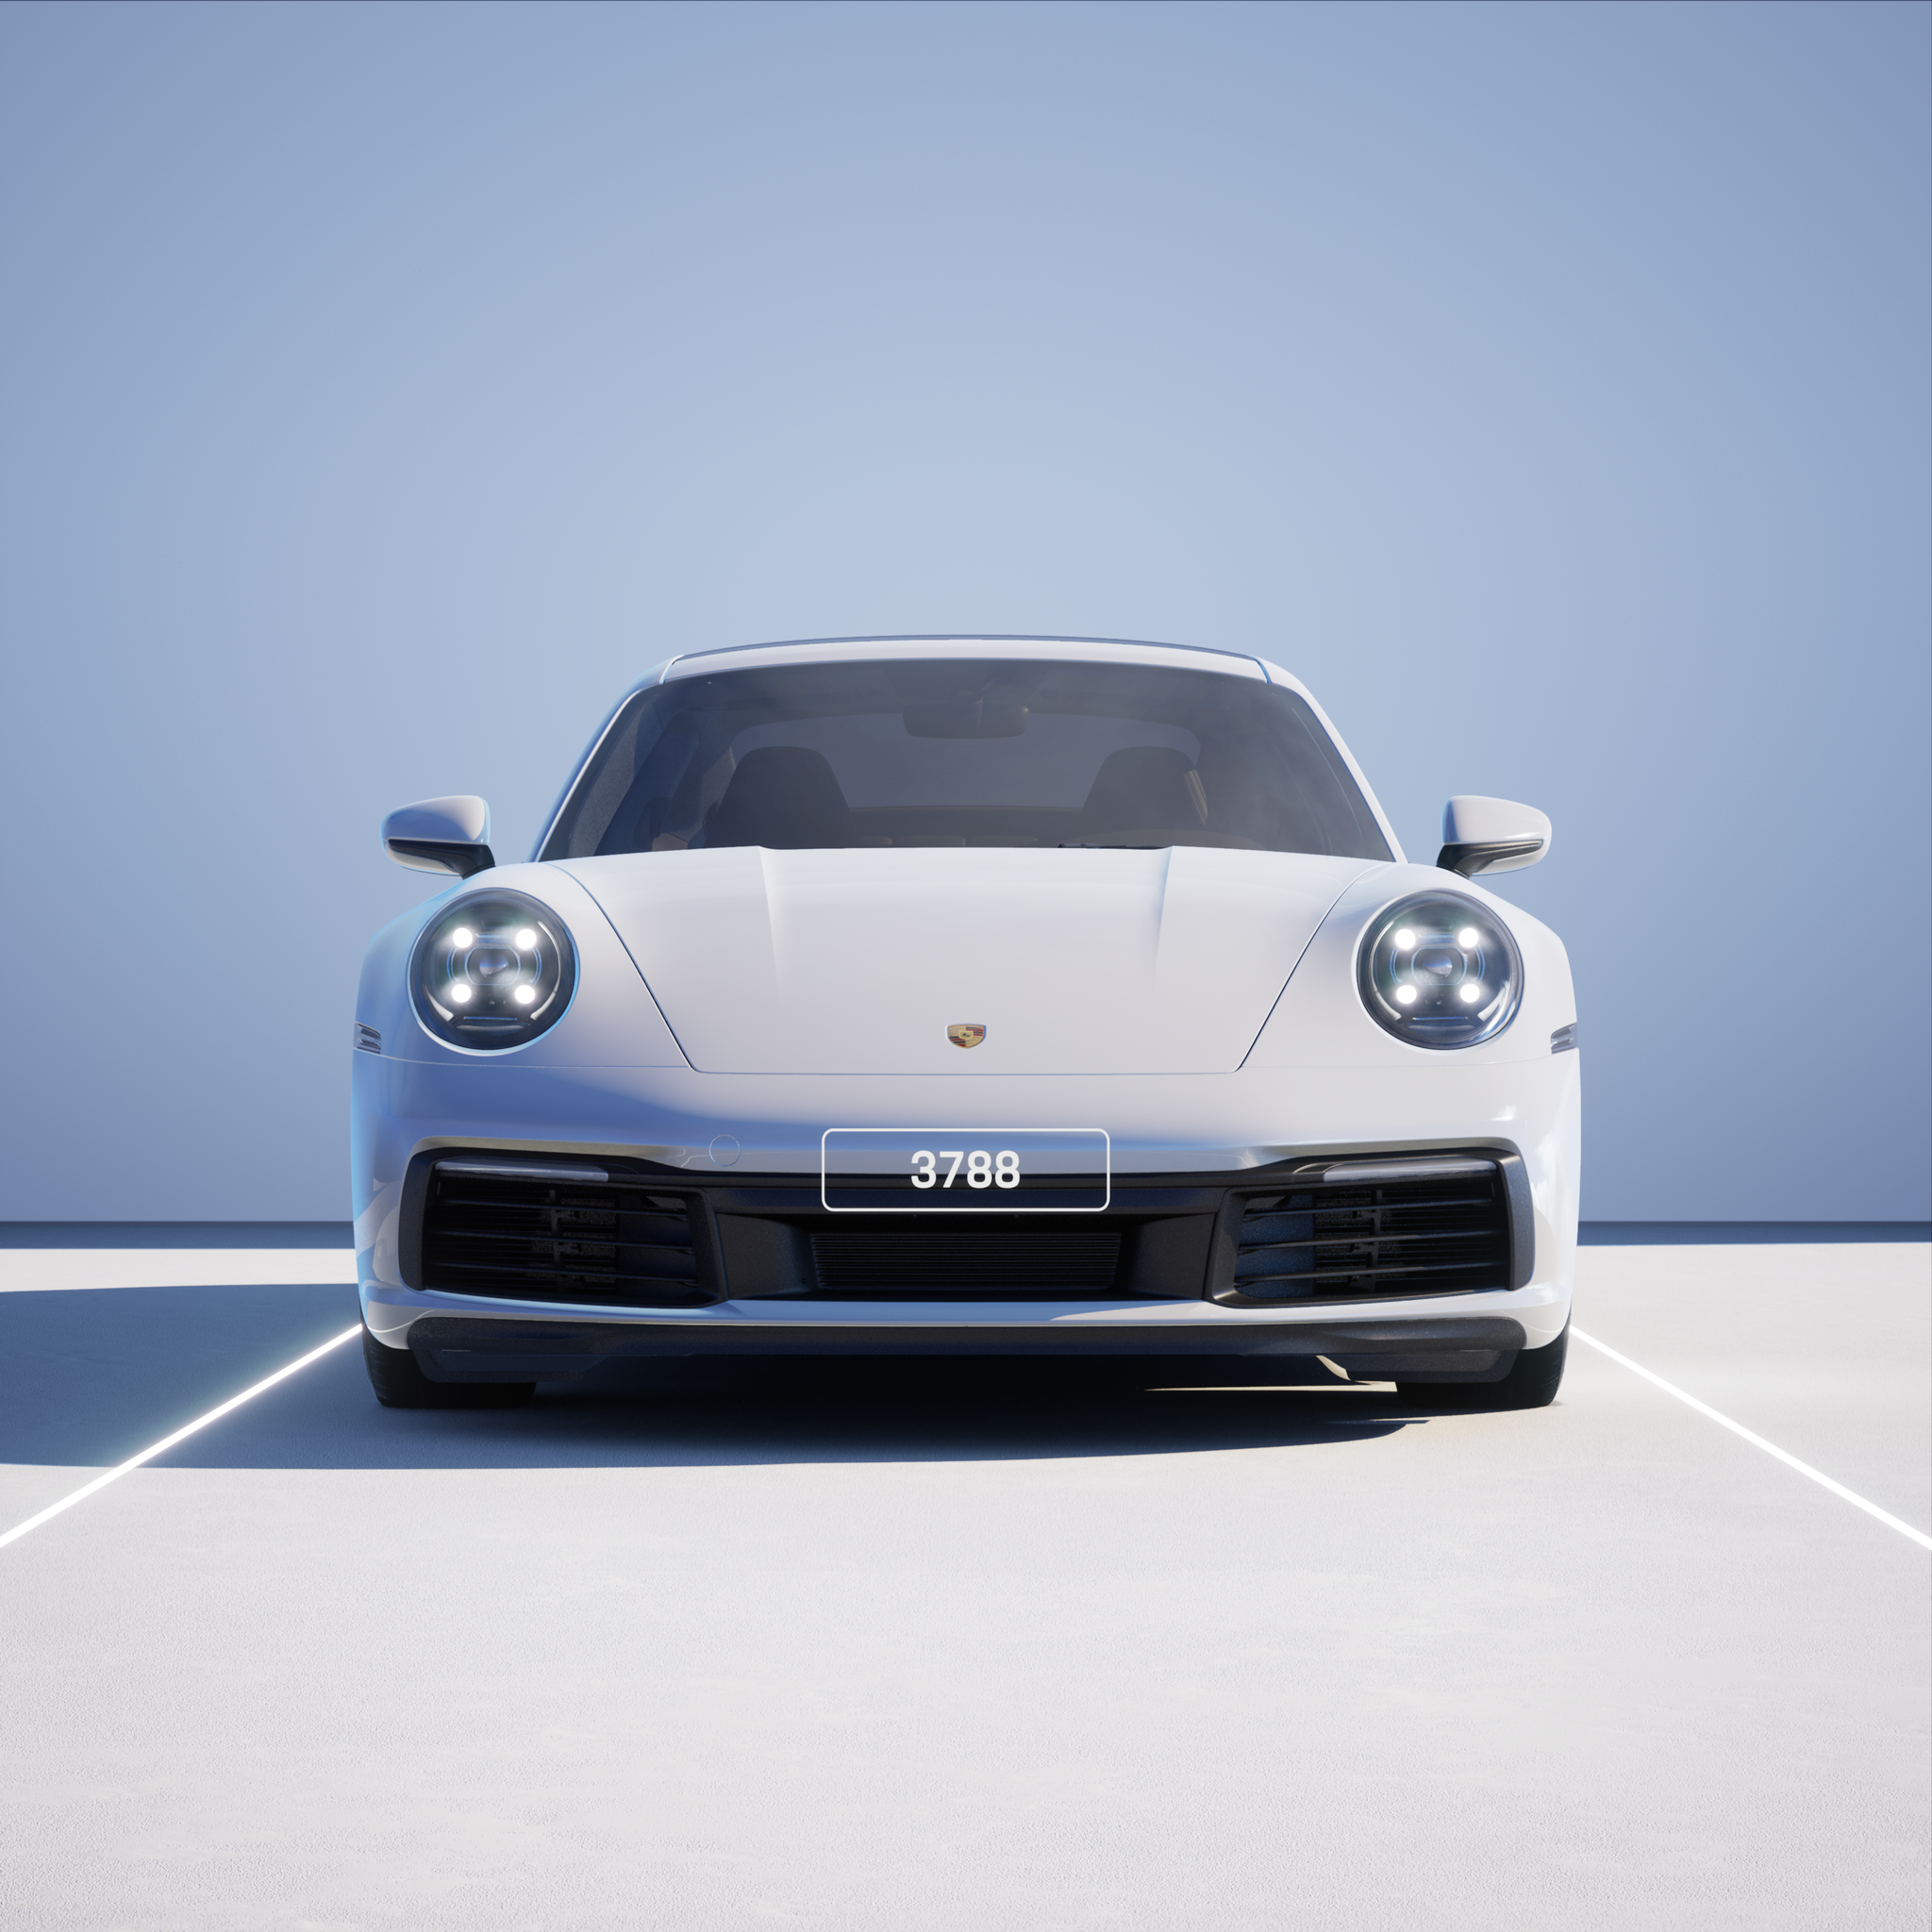 The PORSCHΞ 911 3788 image in phase